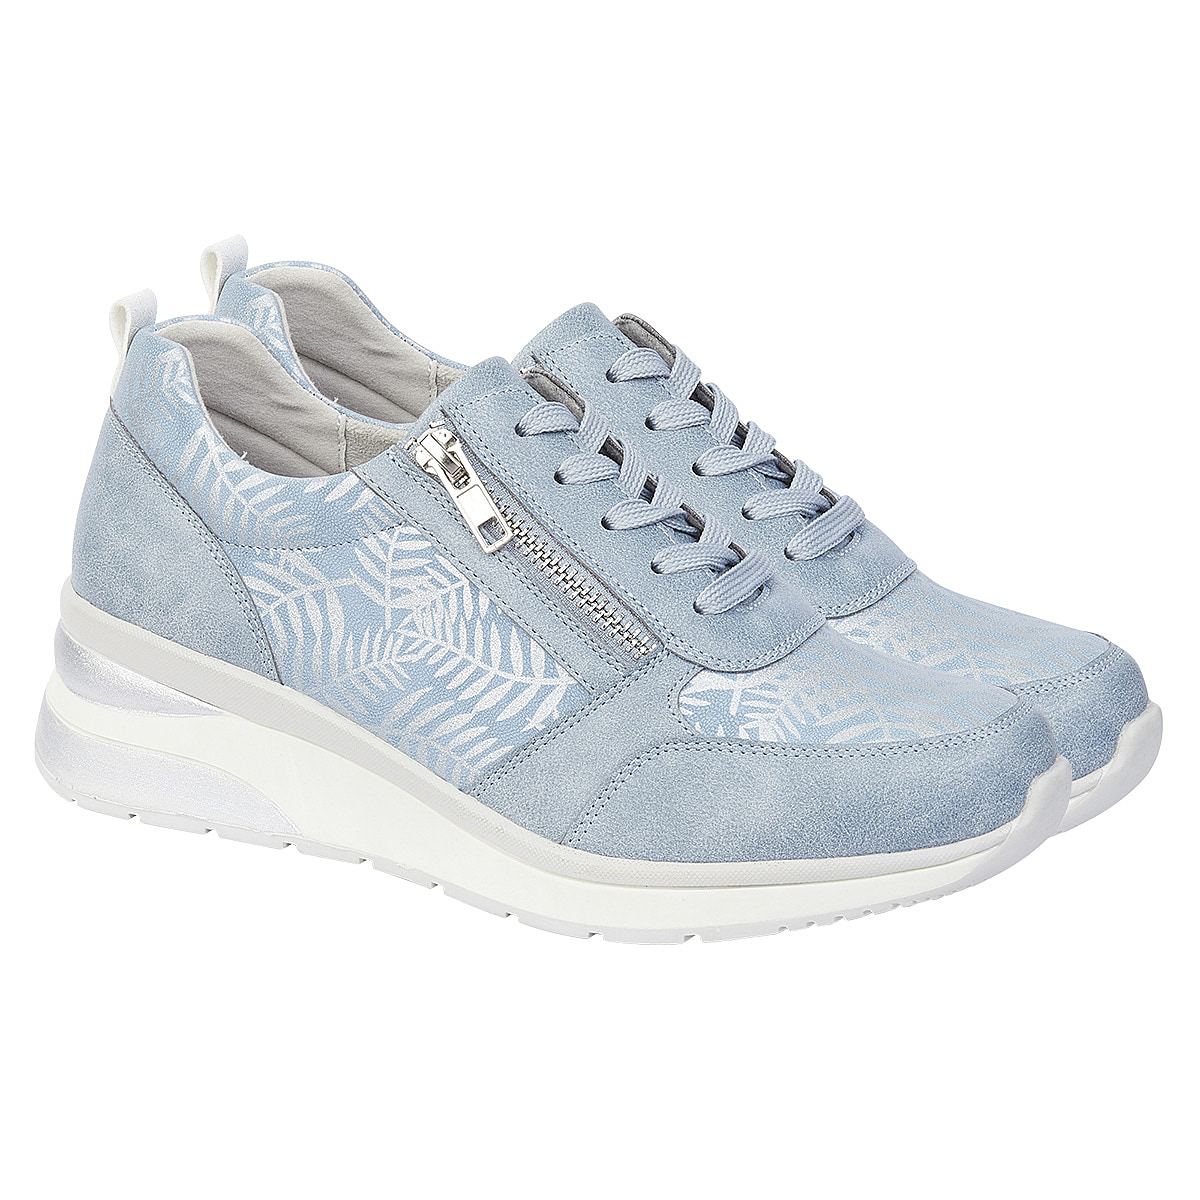 Lace Up Zip Fastening TROPICAL Ladies Shoes (Size 6) - Blue